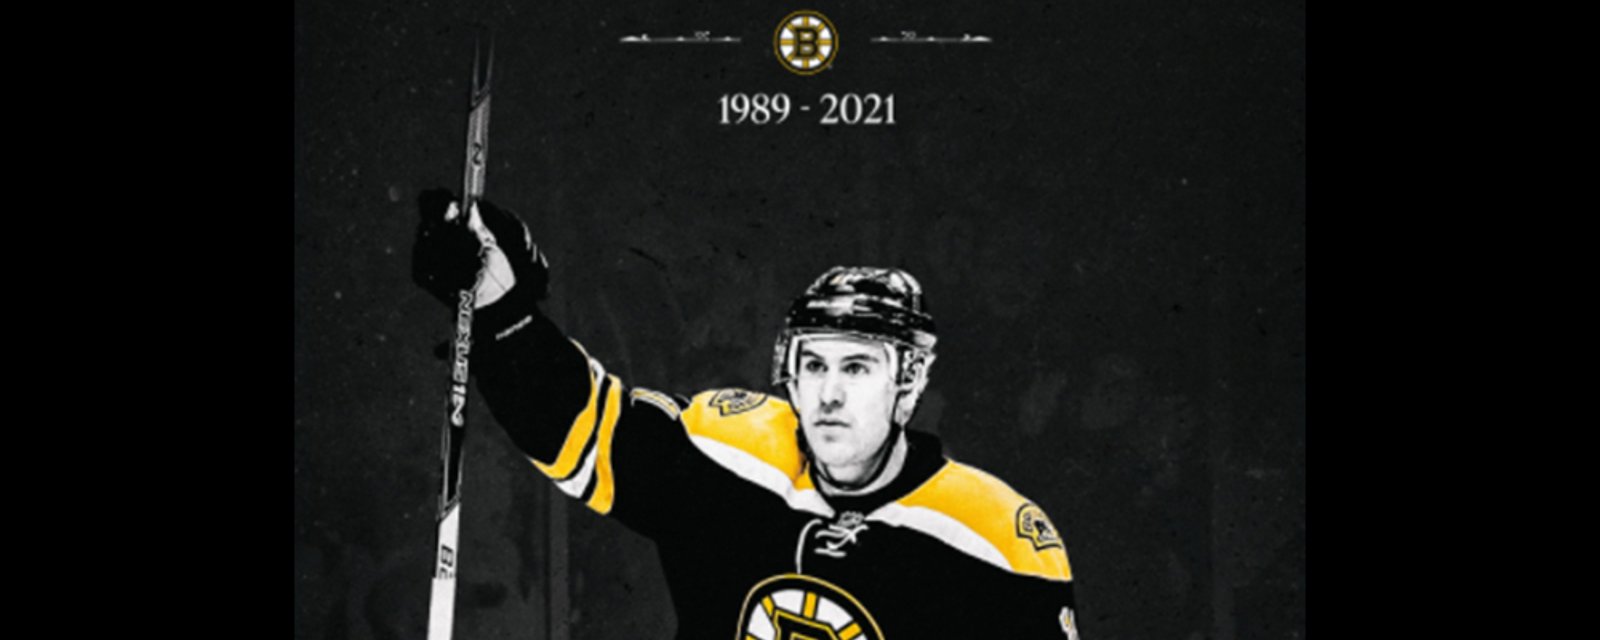 Bruins captain Patrice Bergeron issues a statement on the passing of Jimmy Hayes